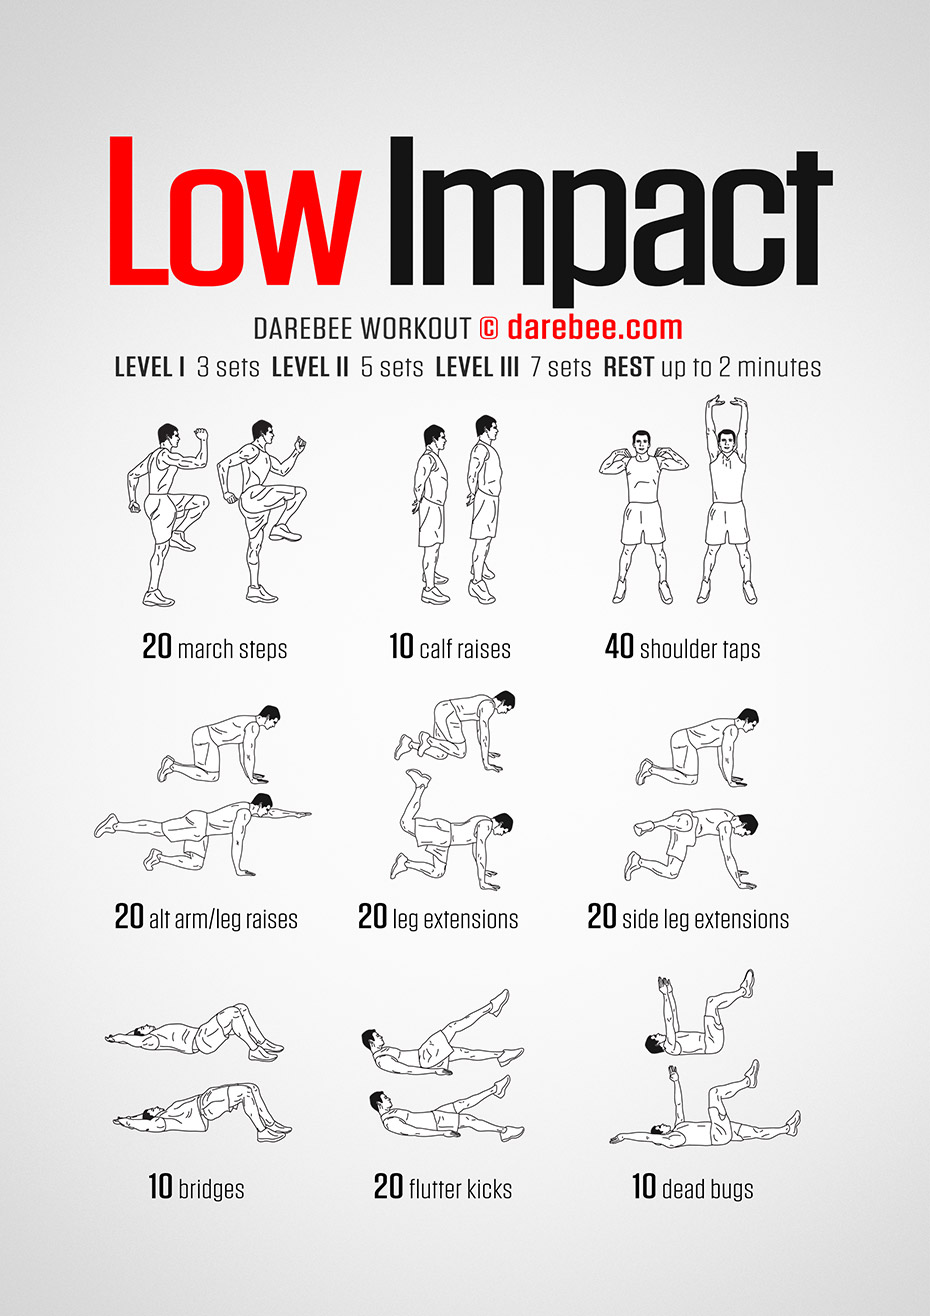 Types of Low Impact Workouts